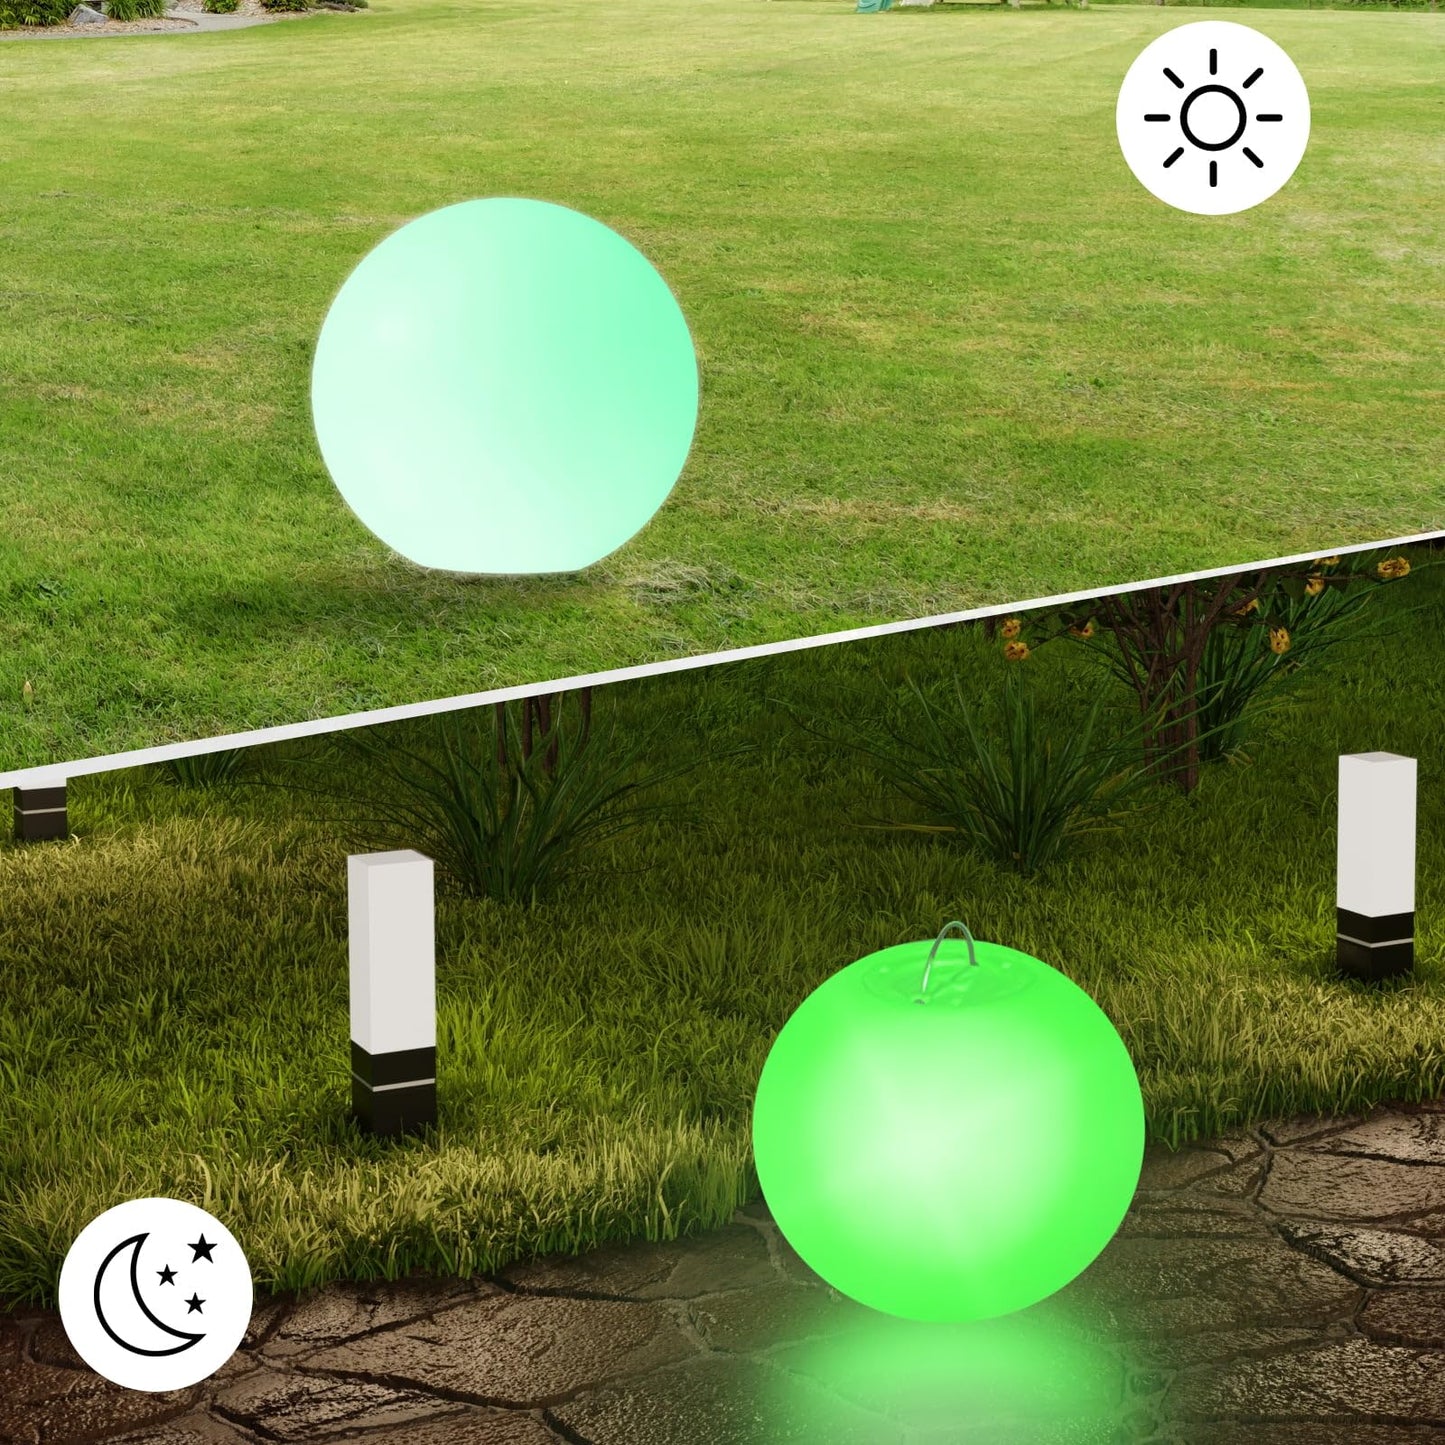 GLHMOGM Floating Pool Lights - 3 Inch Orb Light That Float,Upgraded IP68 Waterproof Color Changing Led Glow Globe Pool, 16 RGB Colors Hot Tub Lights Perfect for Indoor/Outdoor (4 PCS)